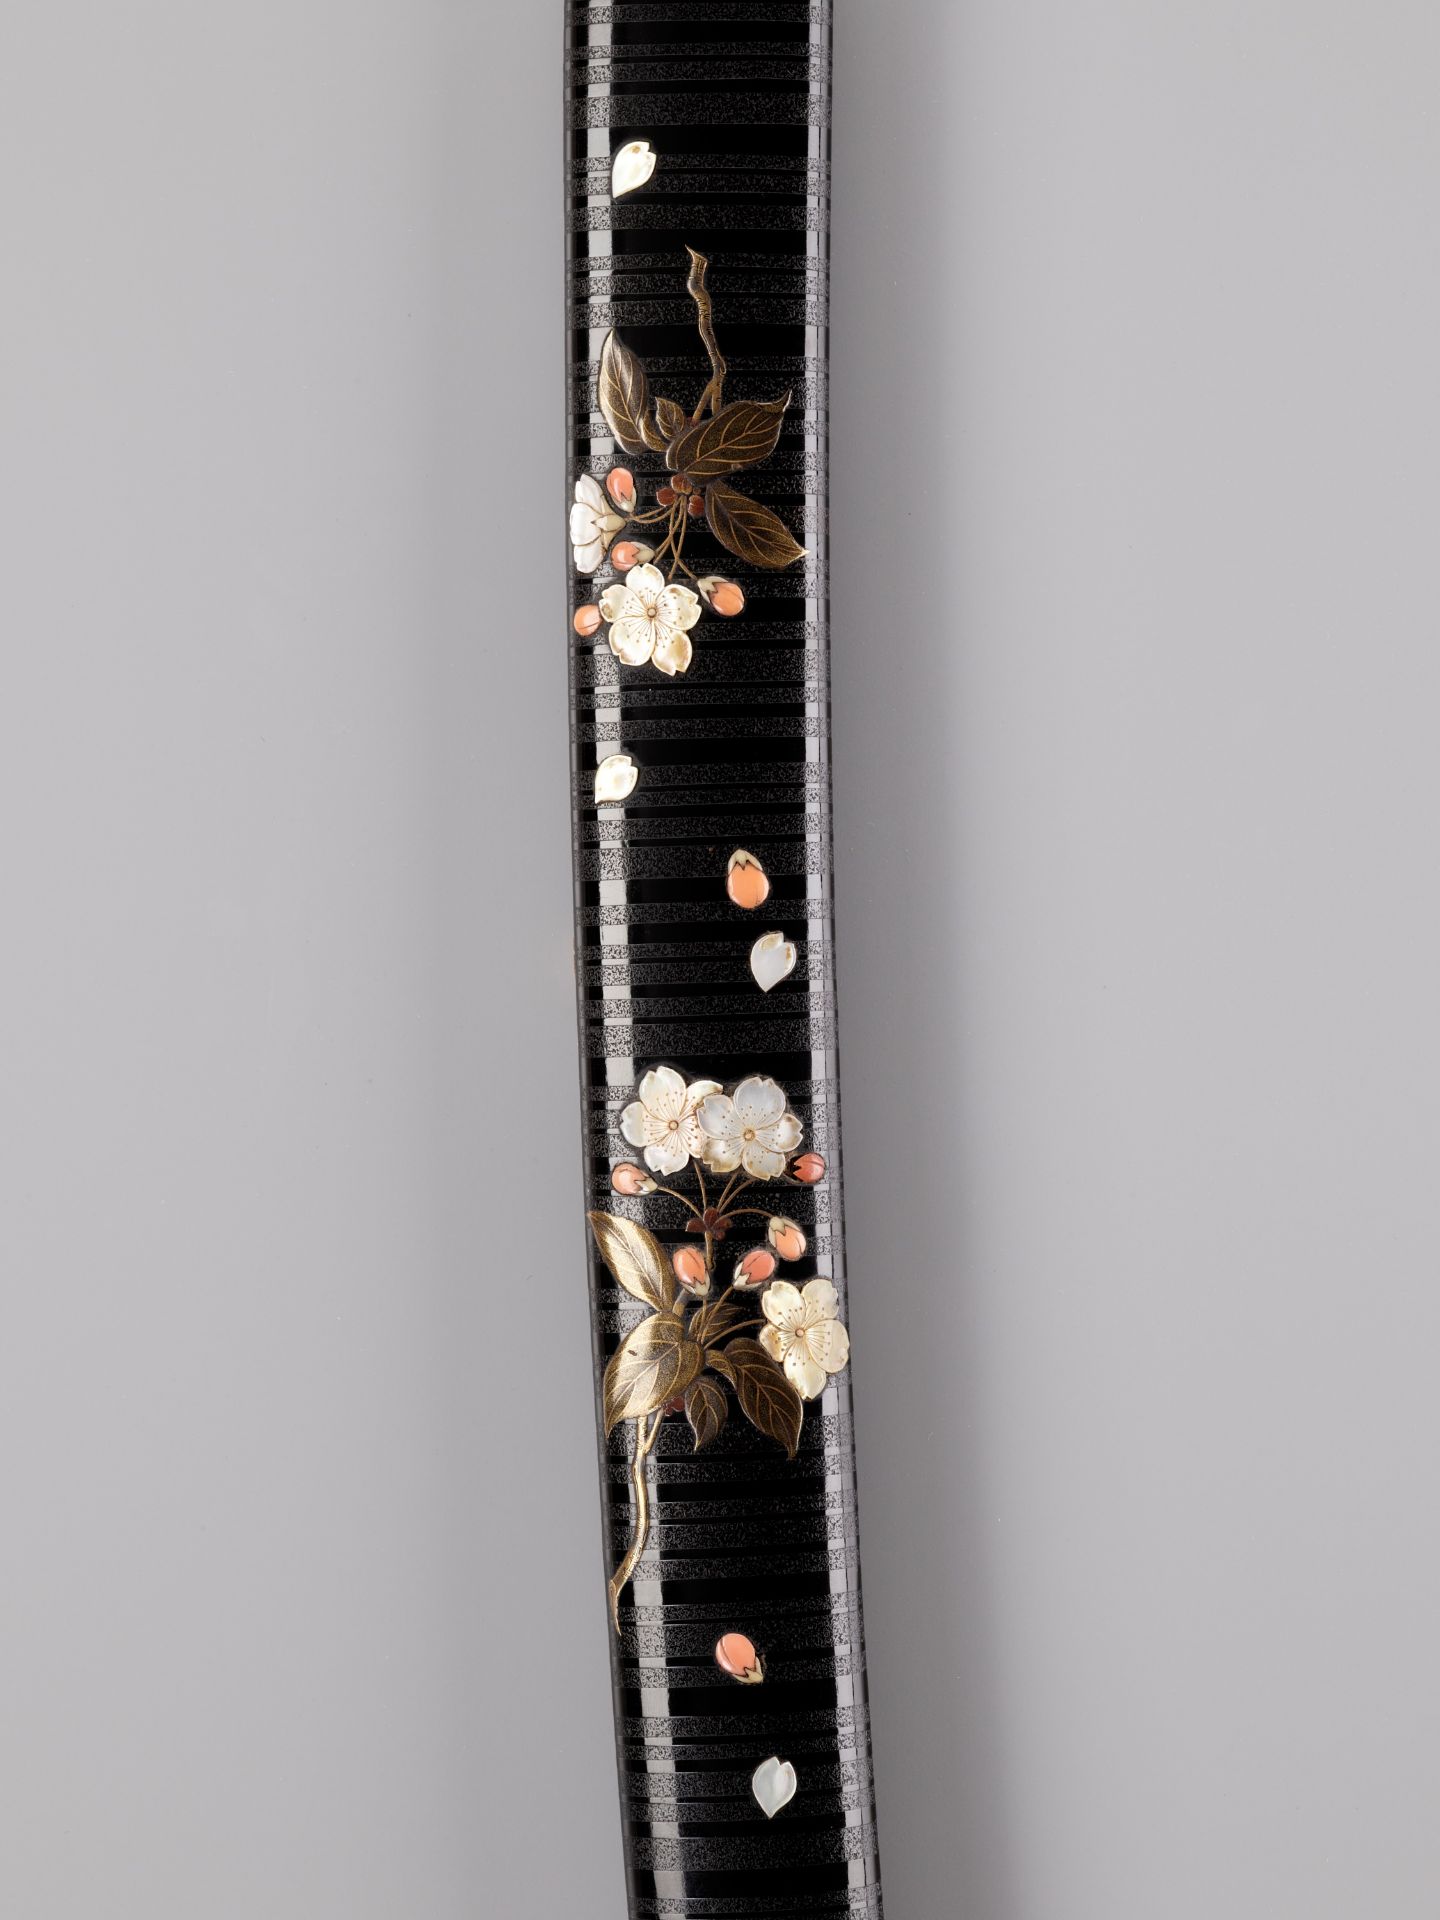 A SUPERB INLAID LACQUER WAKIZASHI KOSHIRAE WITH CHERRY BLOSSOMS - Image 4 of 9